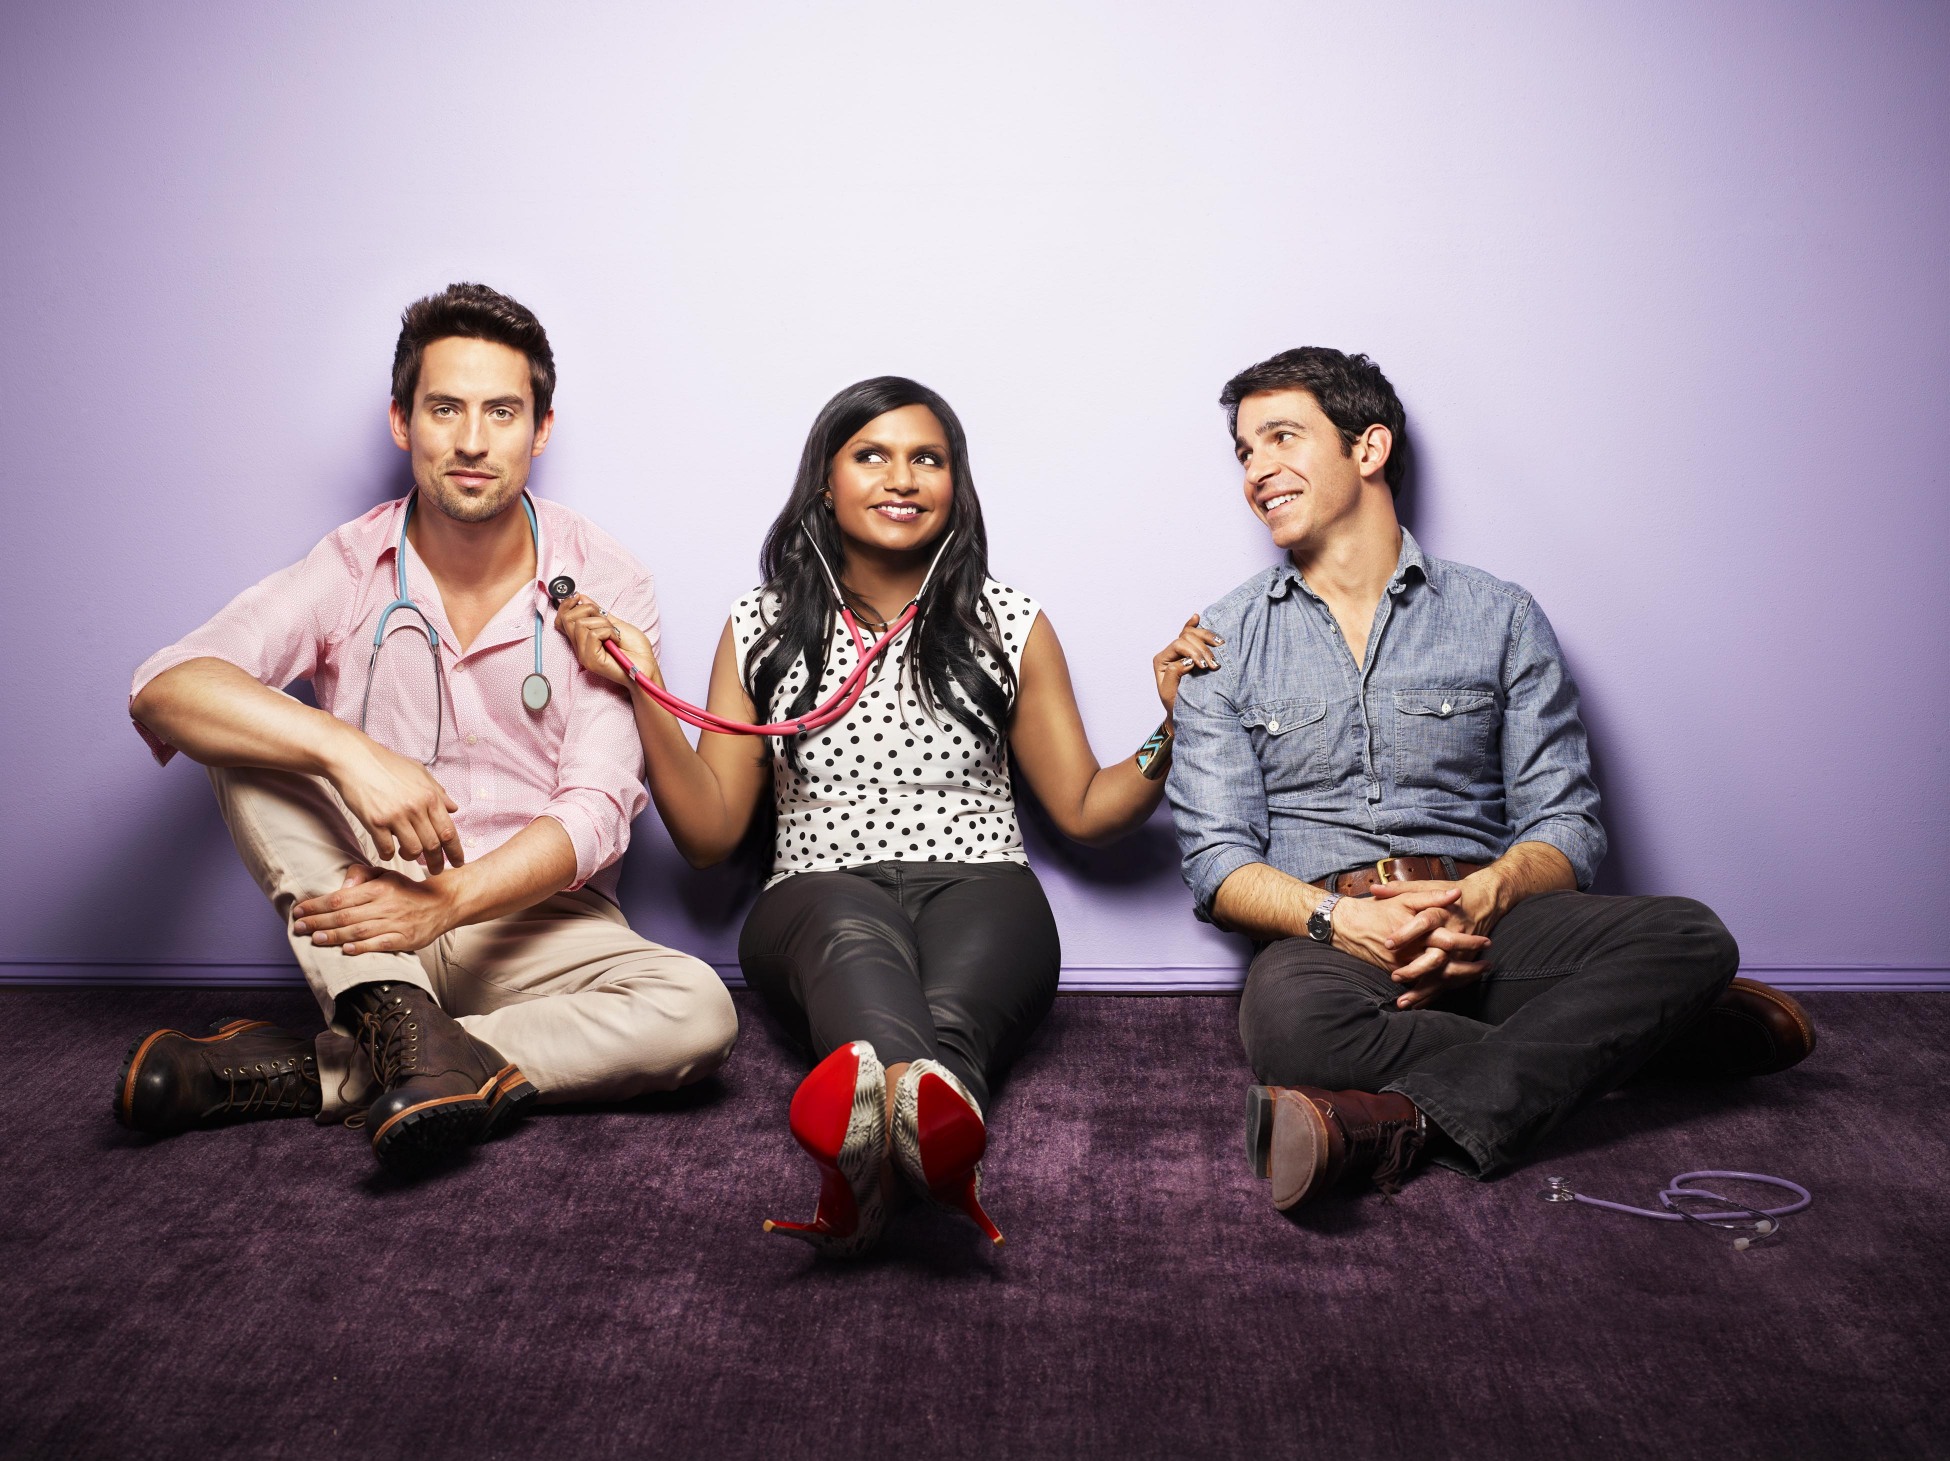 The Mindy Project - Ed Weeks, Mindy Kaling and Chris Messina